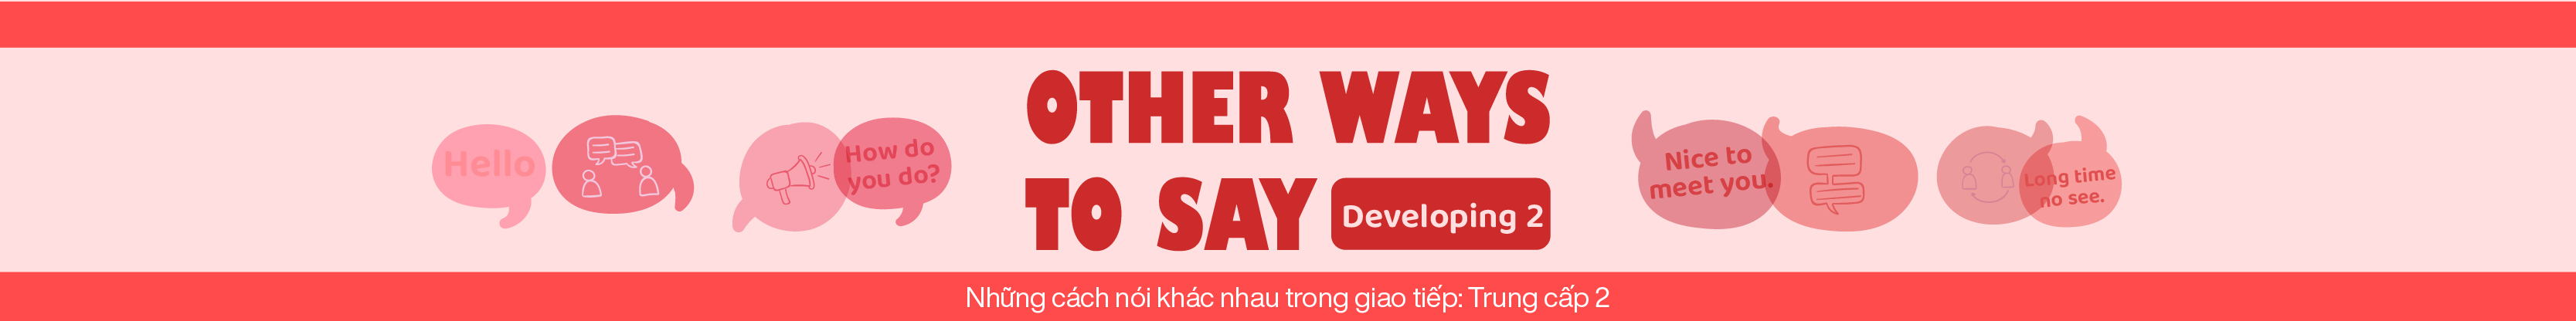 OTHER WAYS TO SAY: DEVELOPING 2 banner